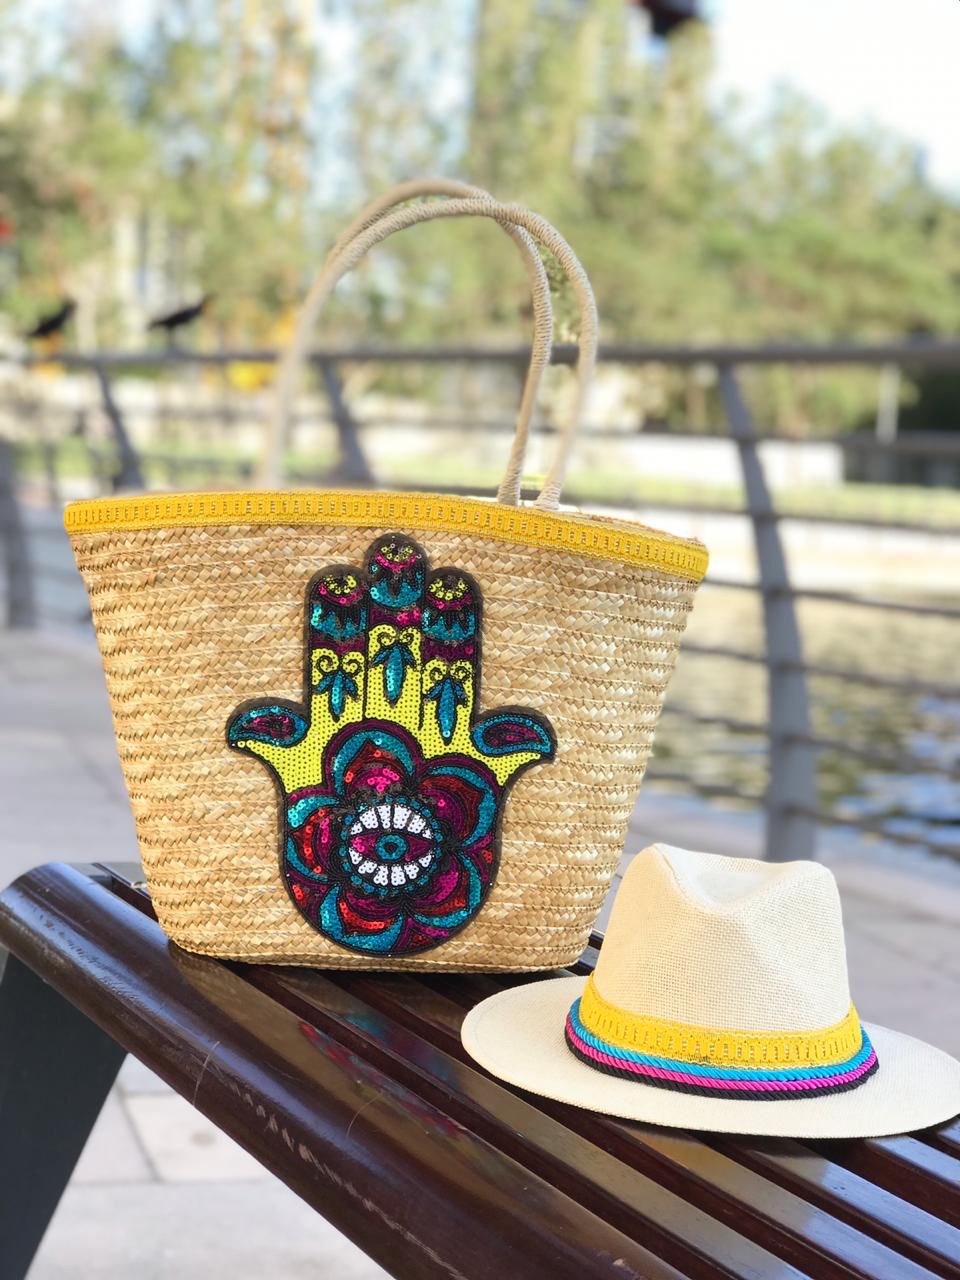 Colorful hamsa basket with matching hat